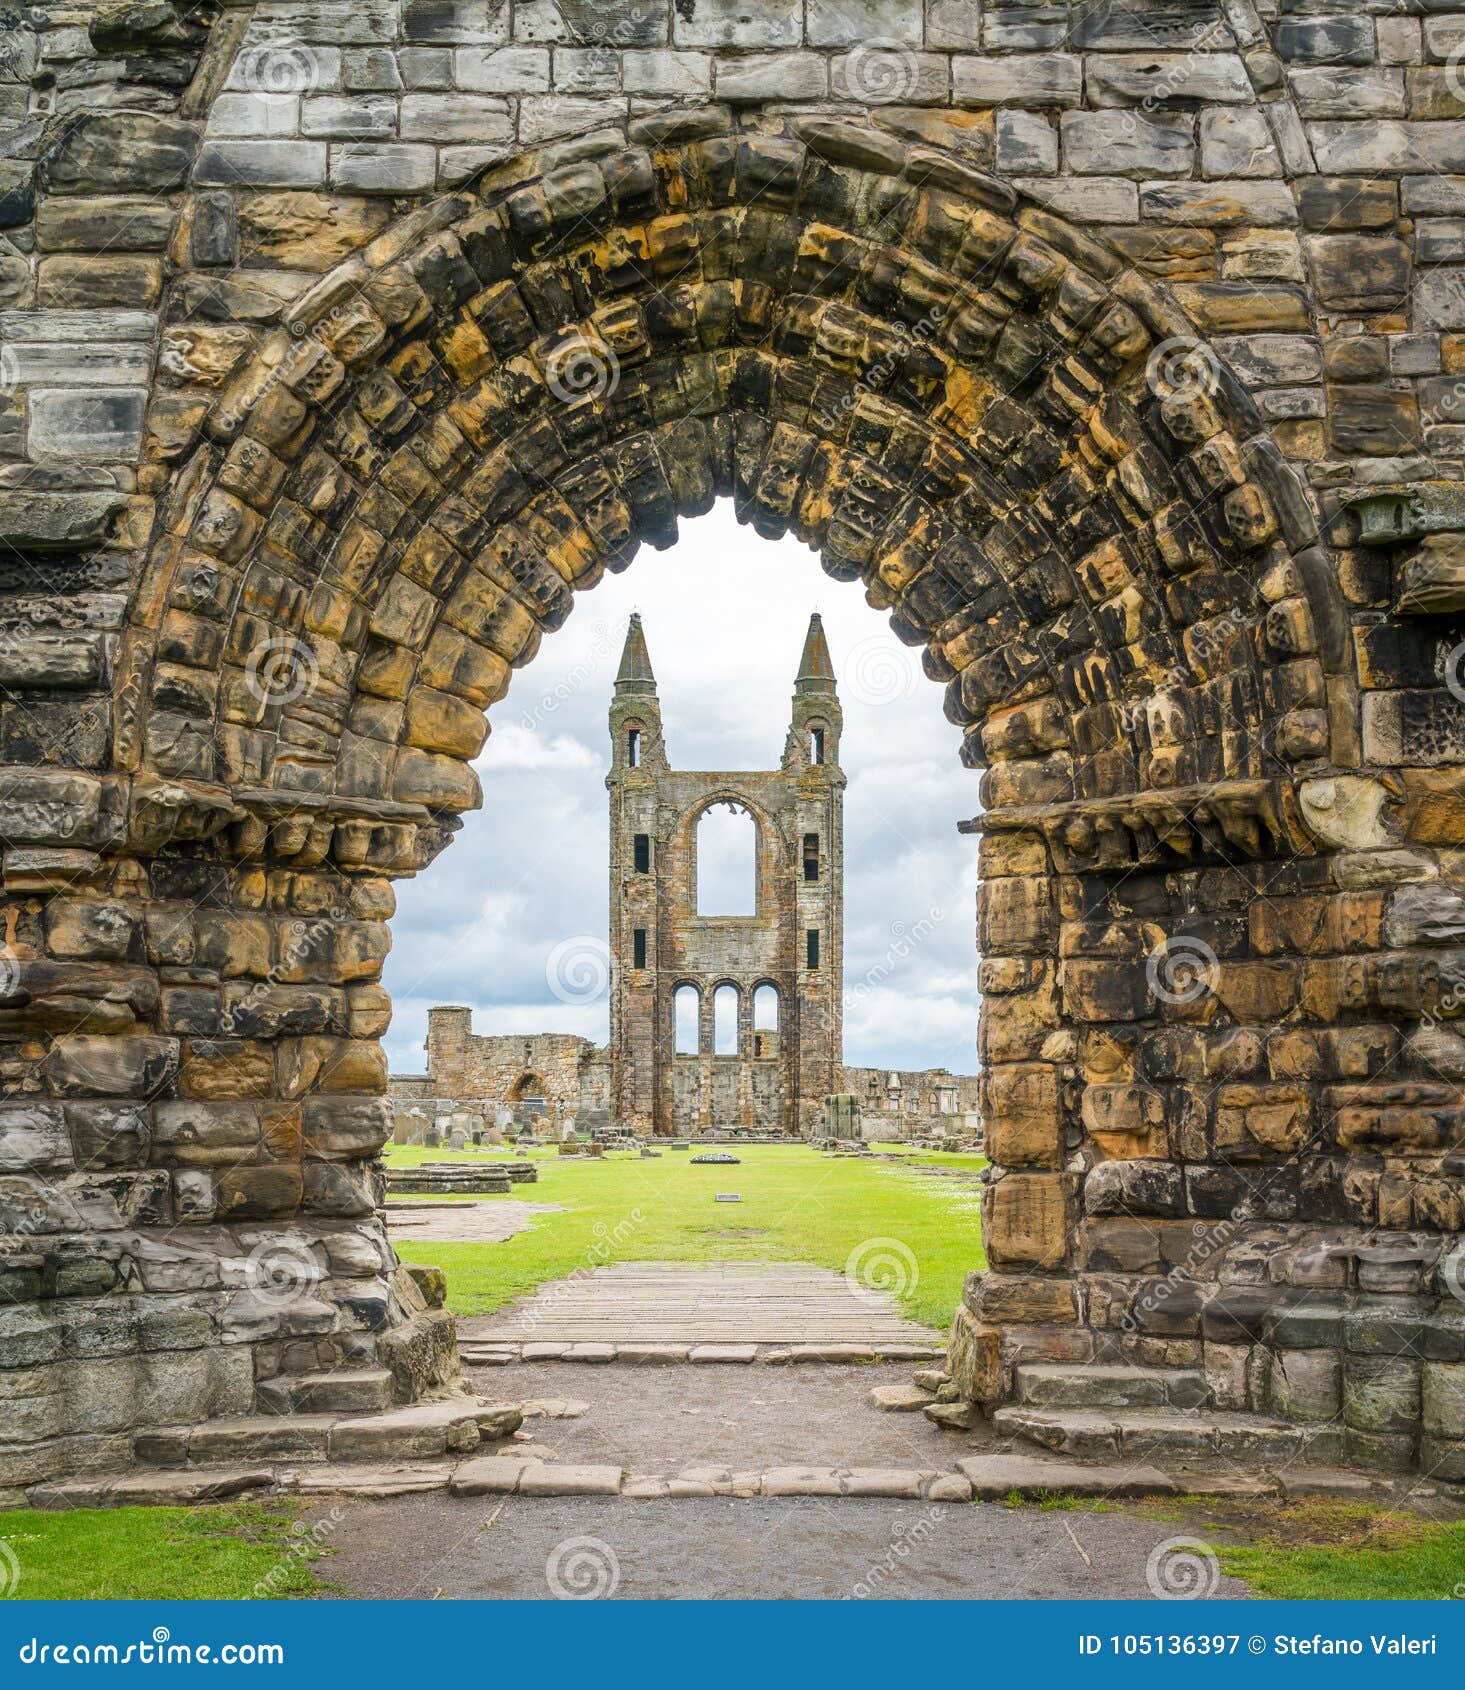 entrance gate to saint andrews cathedral, scotland.